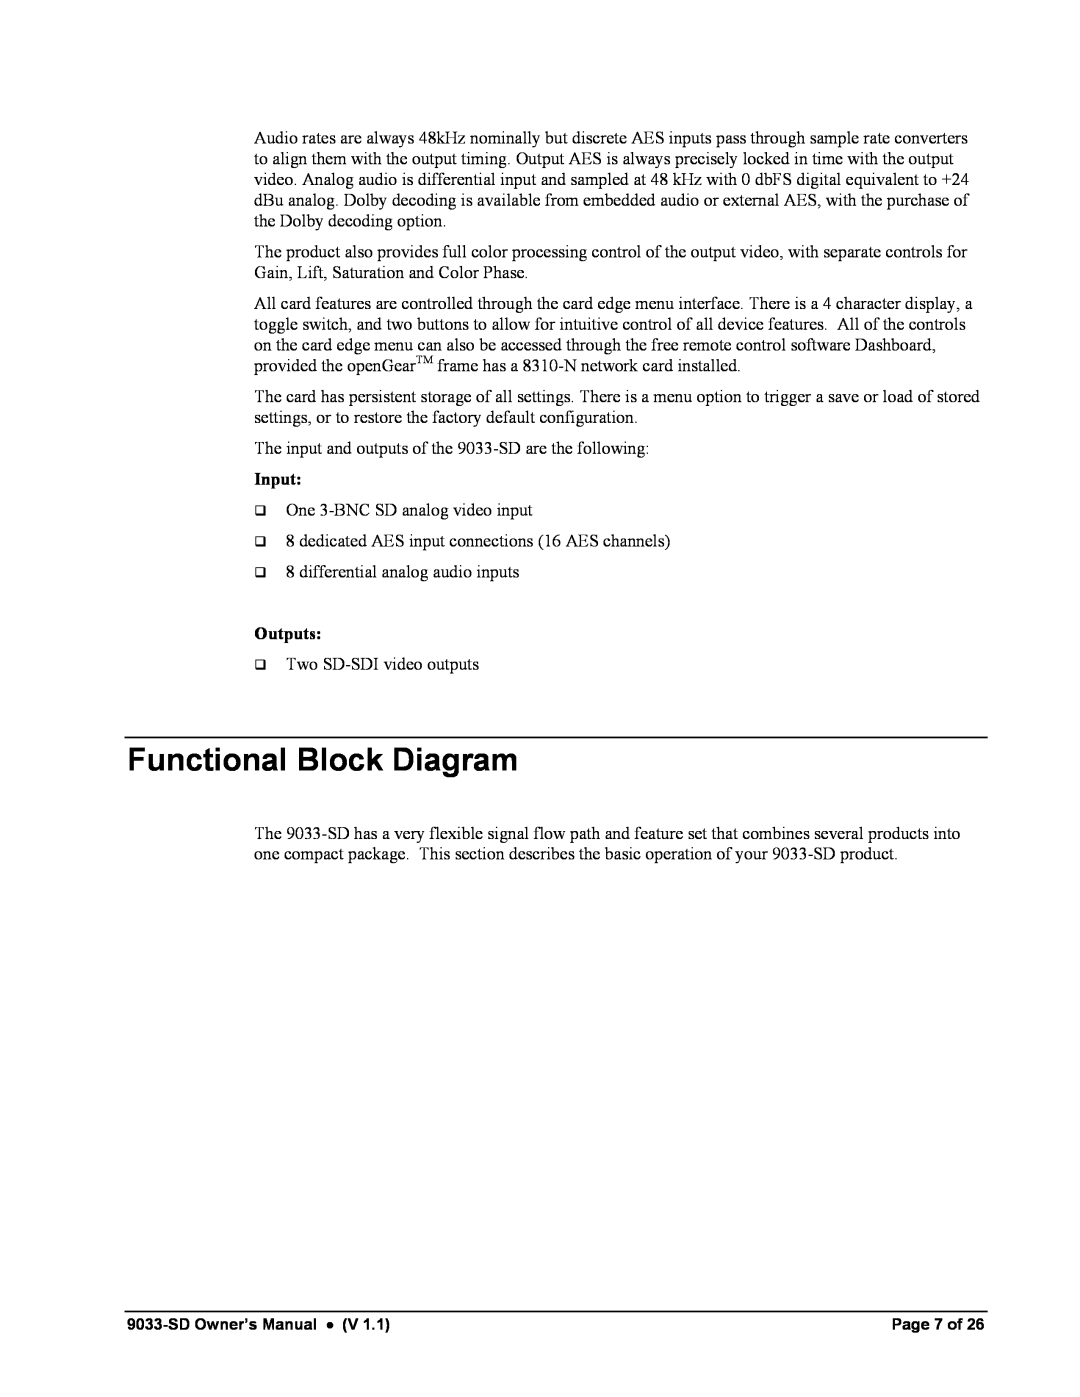 Cobalt Networks 9033-SD owner manual Functional Block Diagram, Input, Outputs 